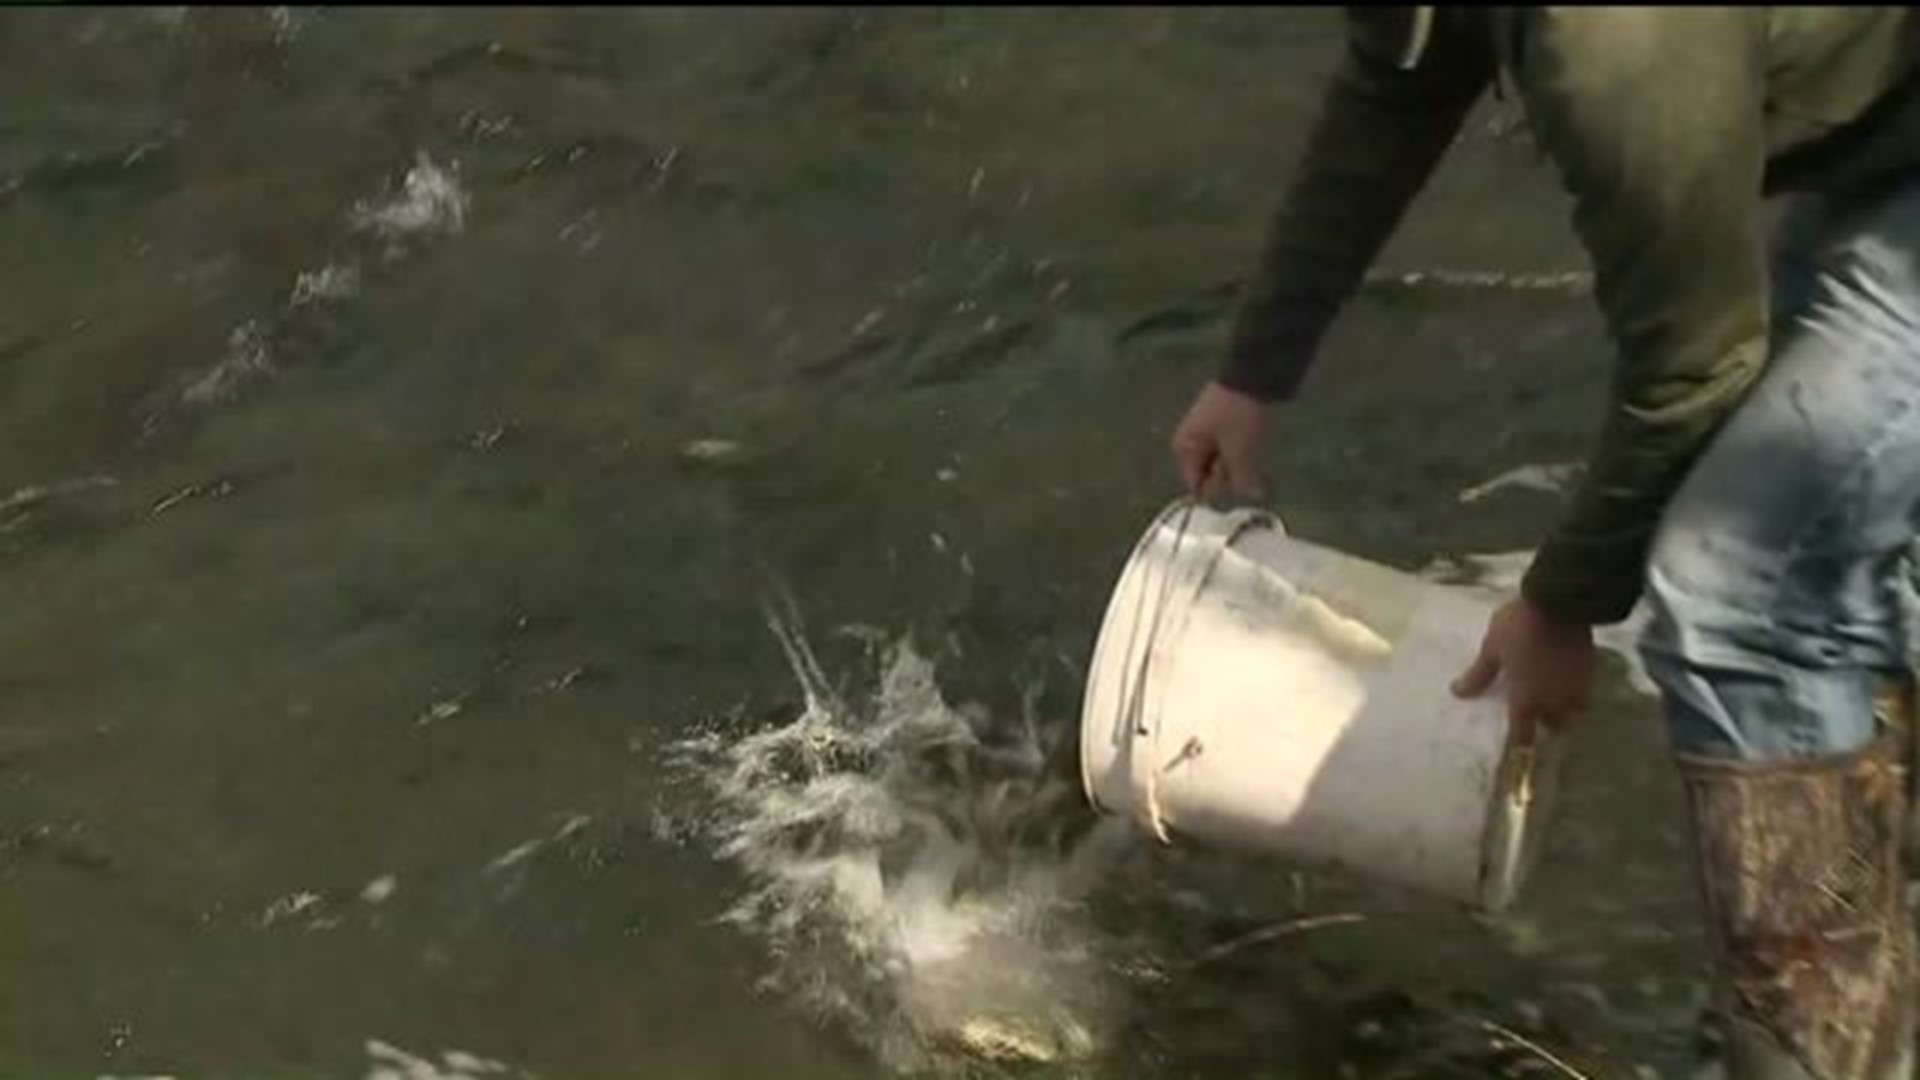 "First Day of Trout Stocking in the Poconos" is lockedFirst Day of Trout Stocking in the Poconos